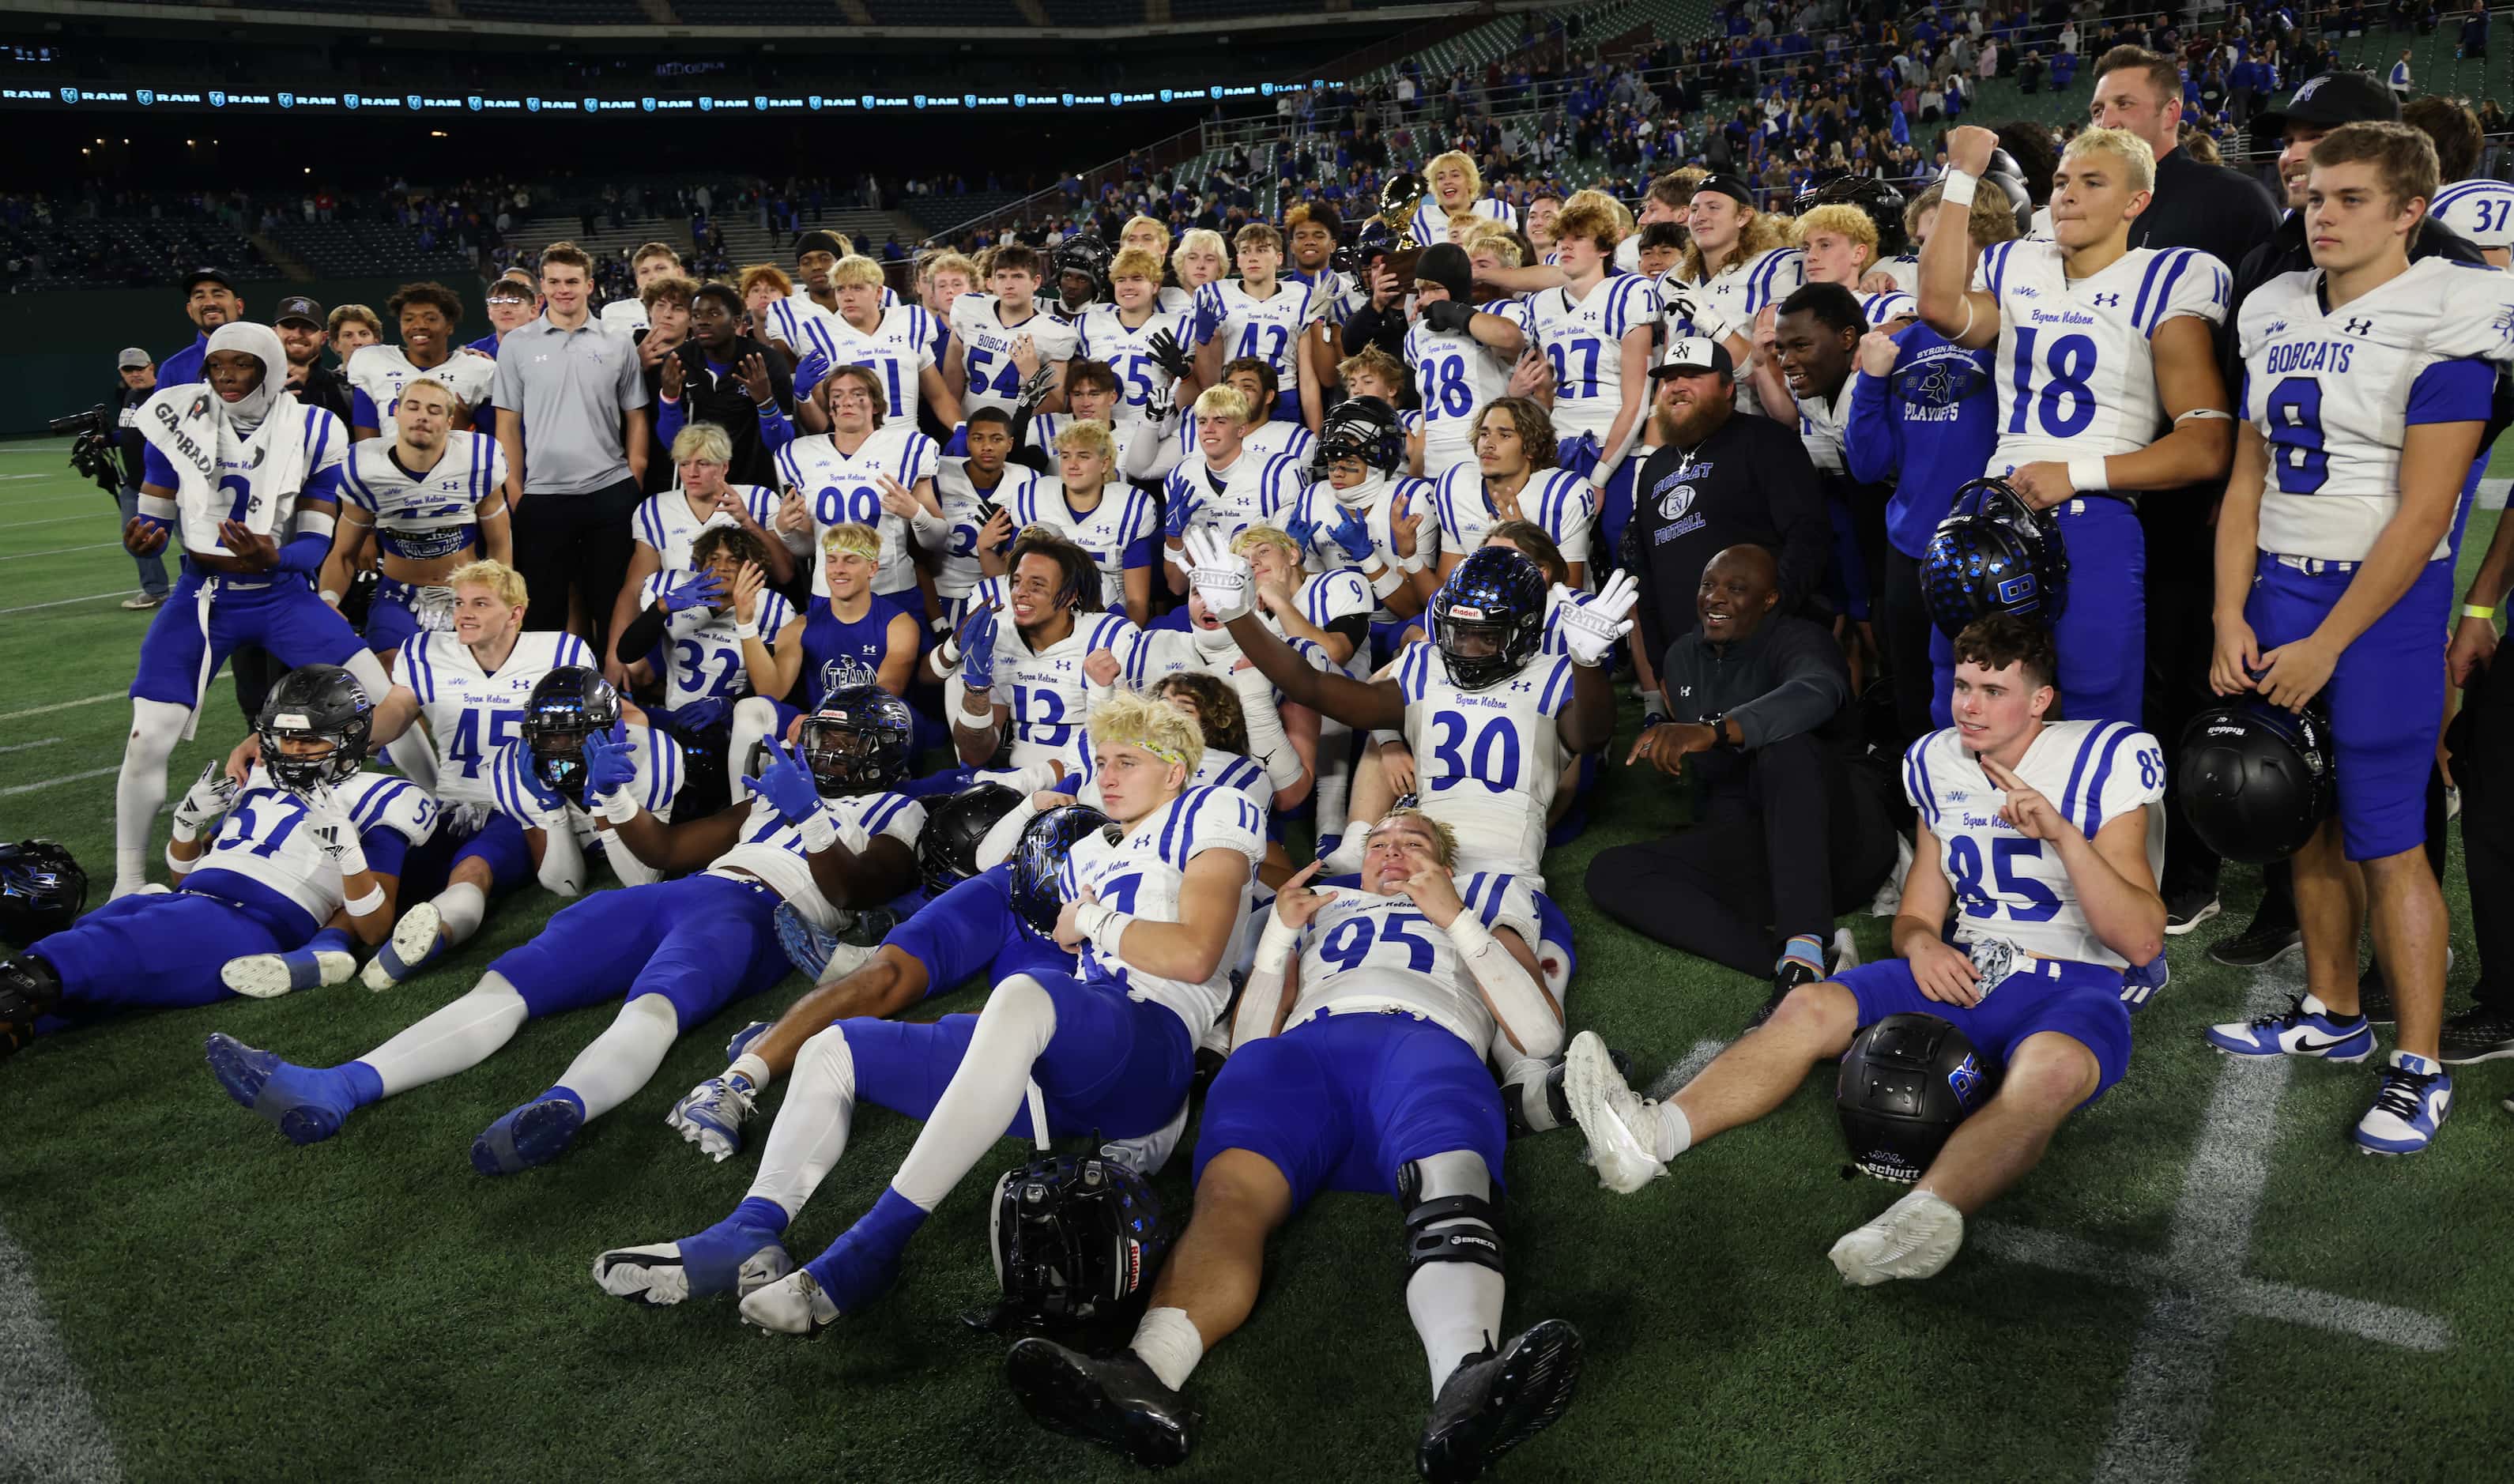 Byron Nelson players and coaches pose for a photo after the team's 52-45 victory over...